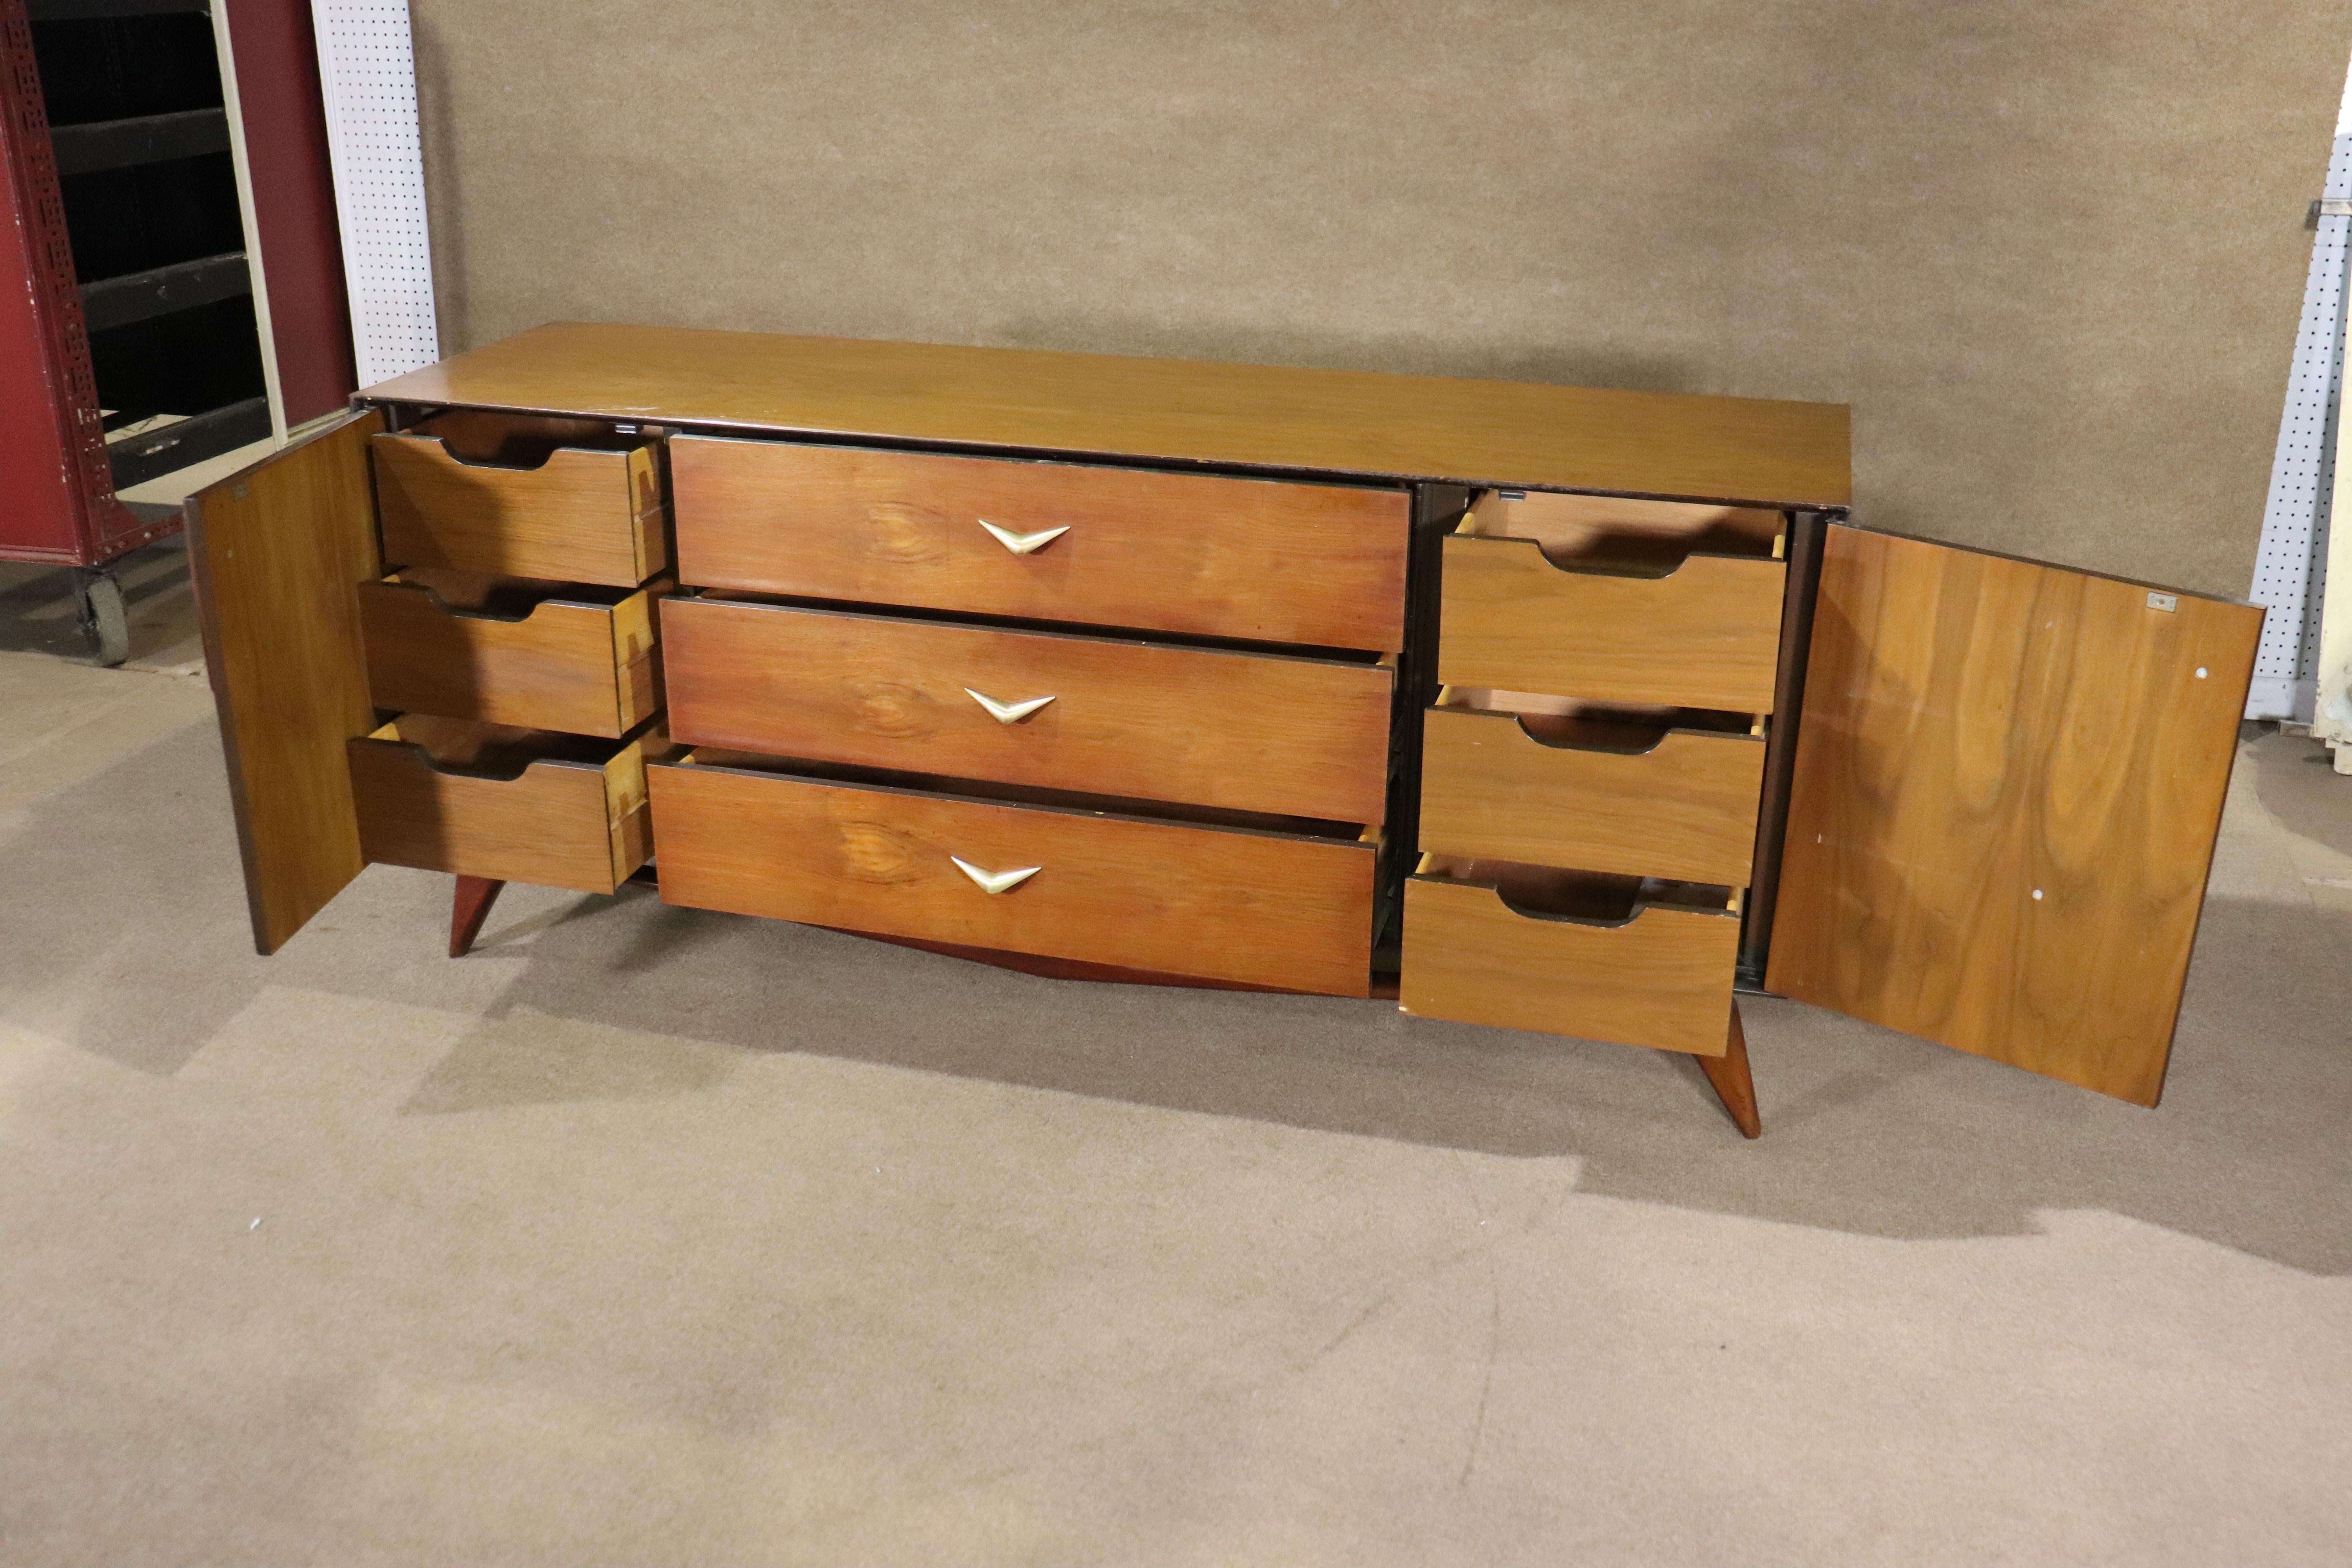 Mid-century modern nine drawer dresser in walnut wood grain and brass accent hardware. Beautifully sculpted wood base and matching boomerang handles. Dresser body seems to float above the wood base.
Please confirm location NY or NJ